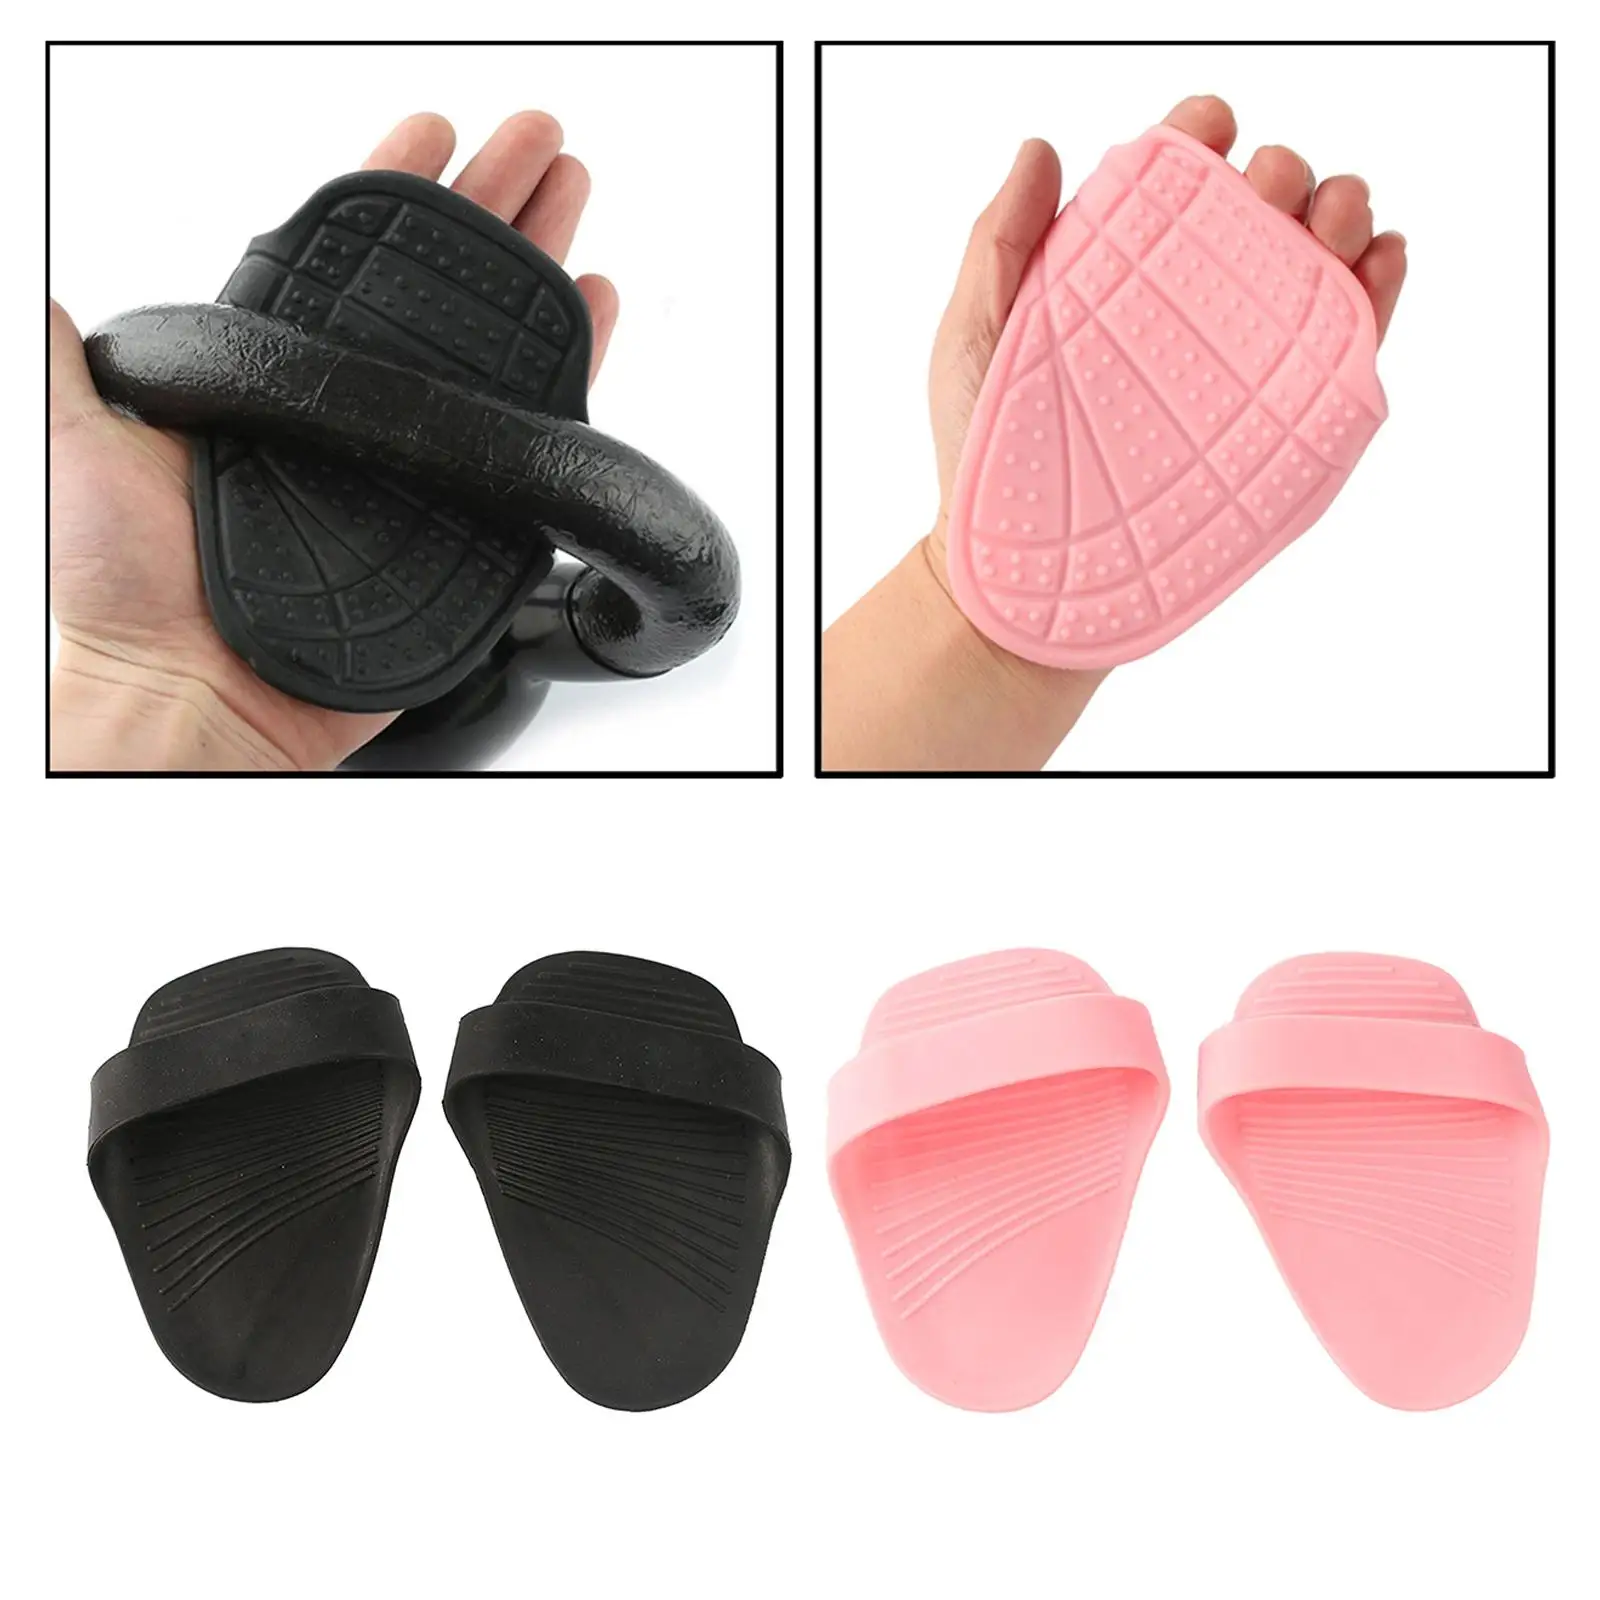 Lifting Grip Pads Dumbbell Grips Pads Hand Grip Anti Slip Workout Gloves